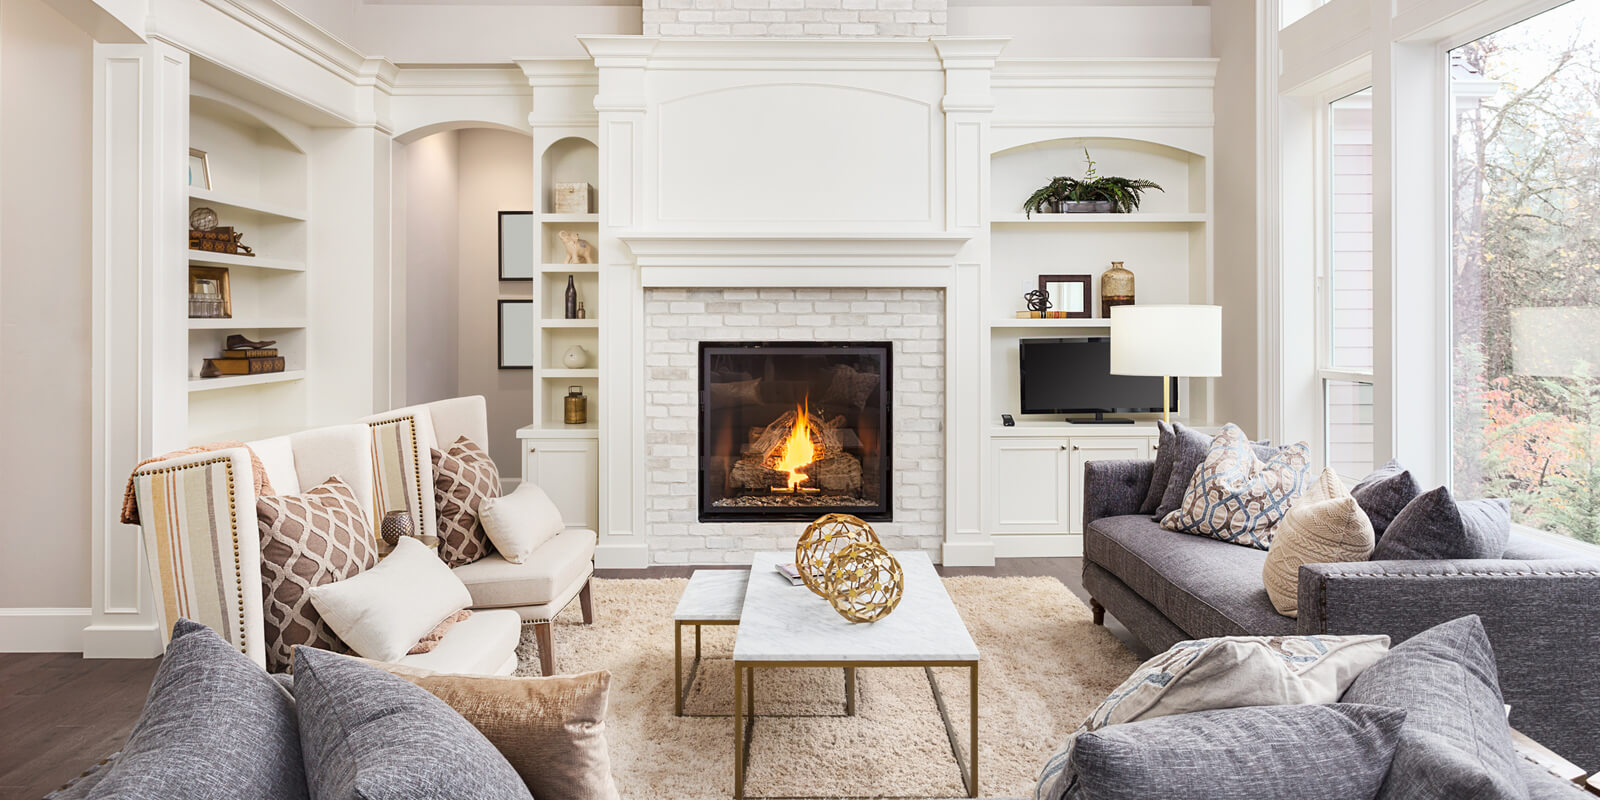 Elegant living room space with fireplace